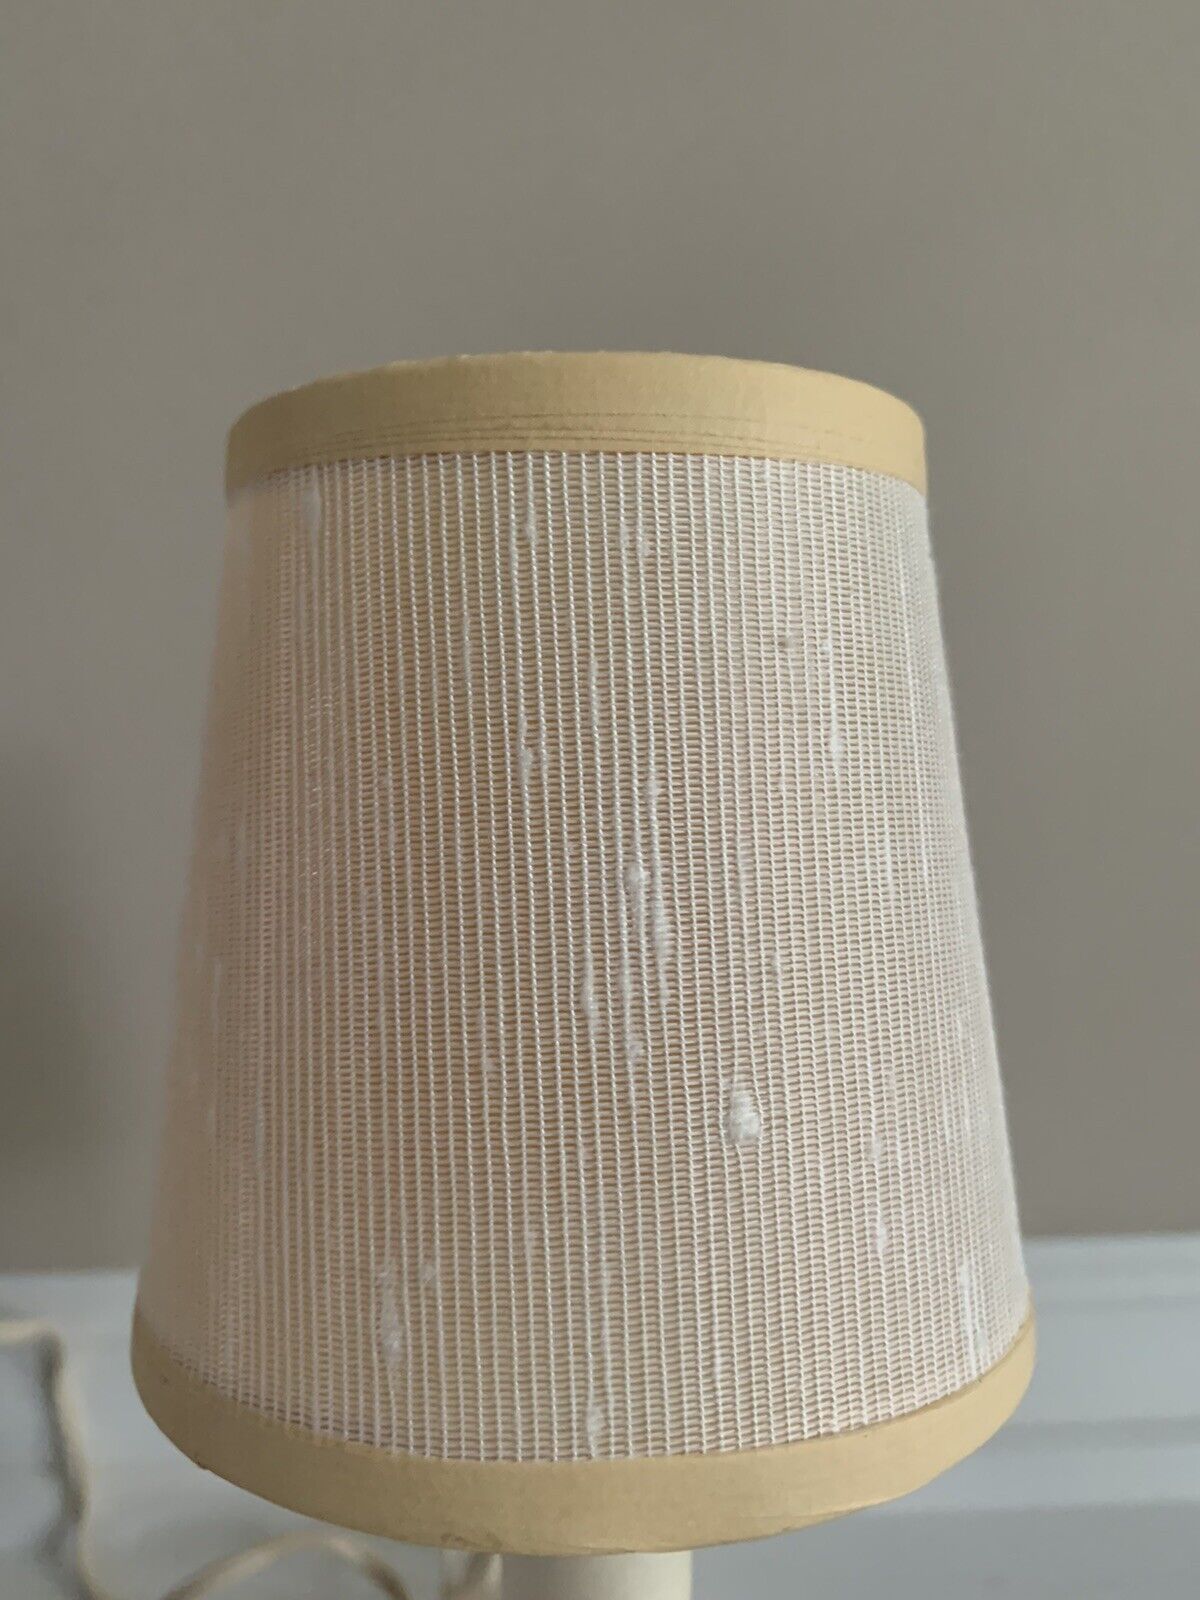 Vintage Ivory Clip On Small Lamp Shade 4”x4”